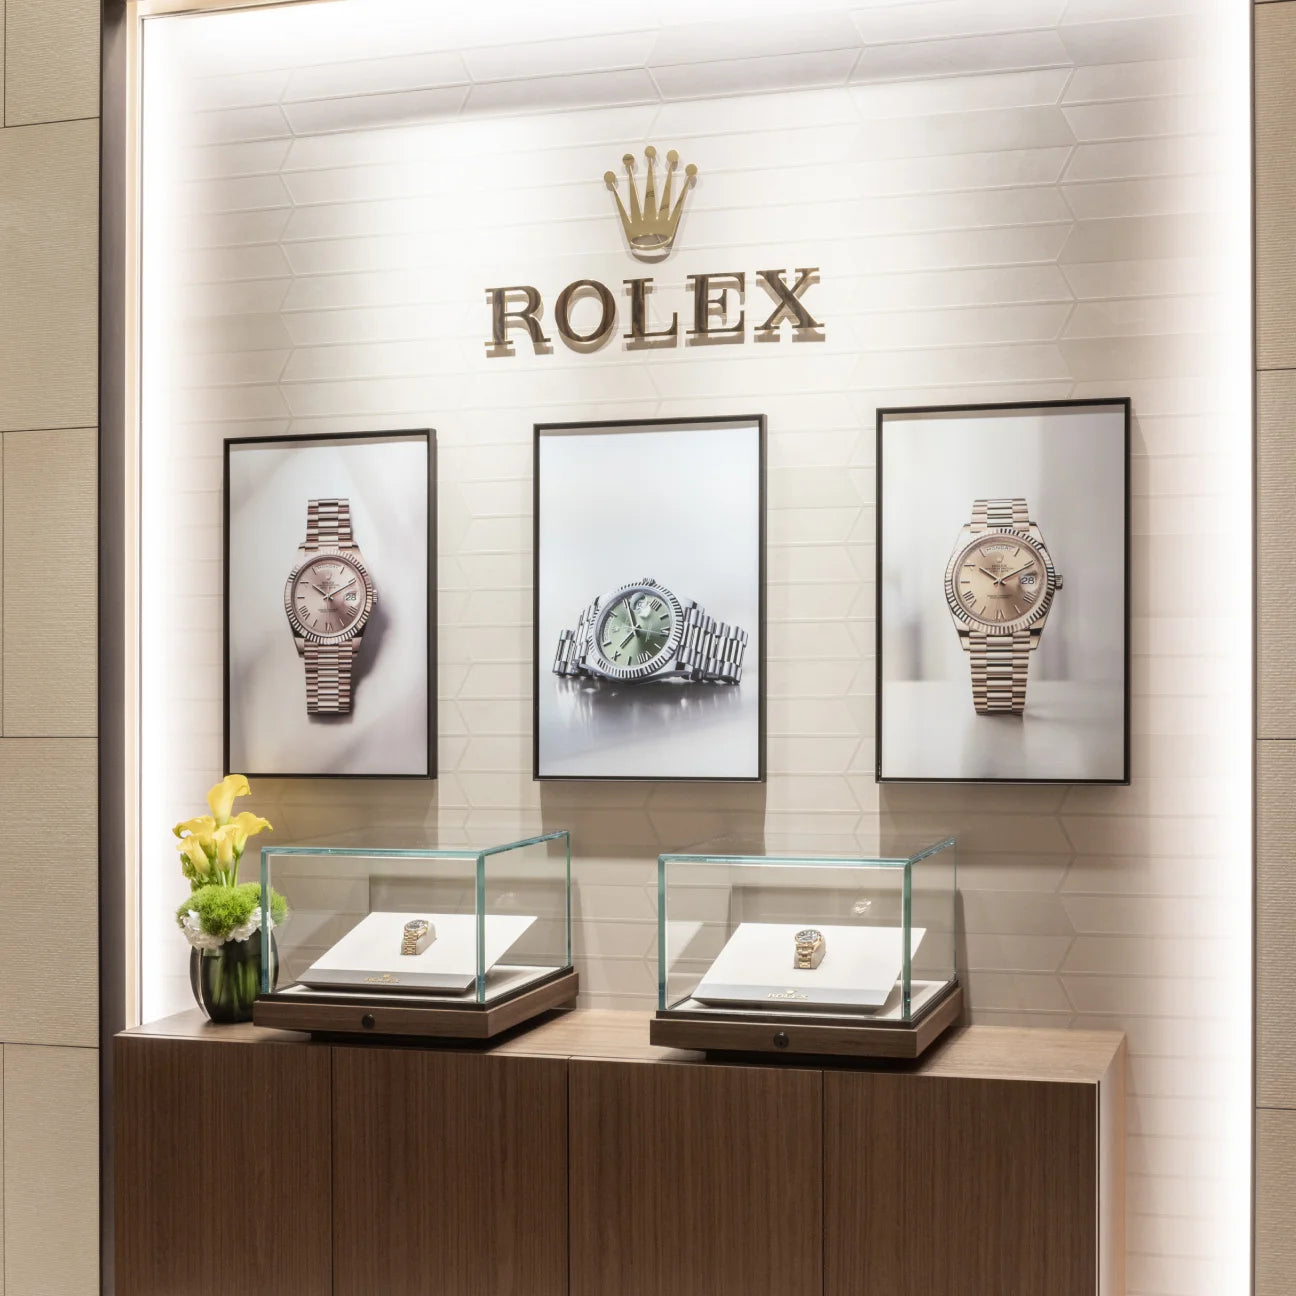 Rolex team at Orr's Jewelers in Sewickley, PA